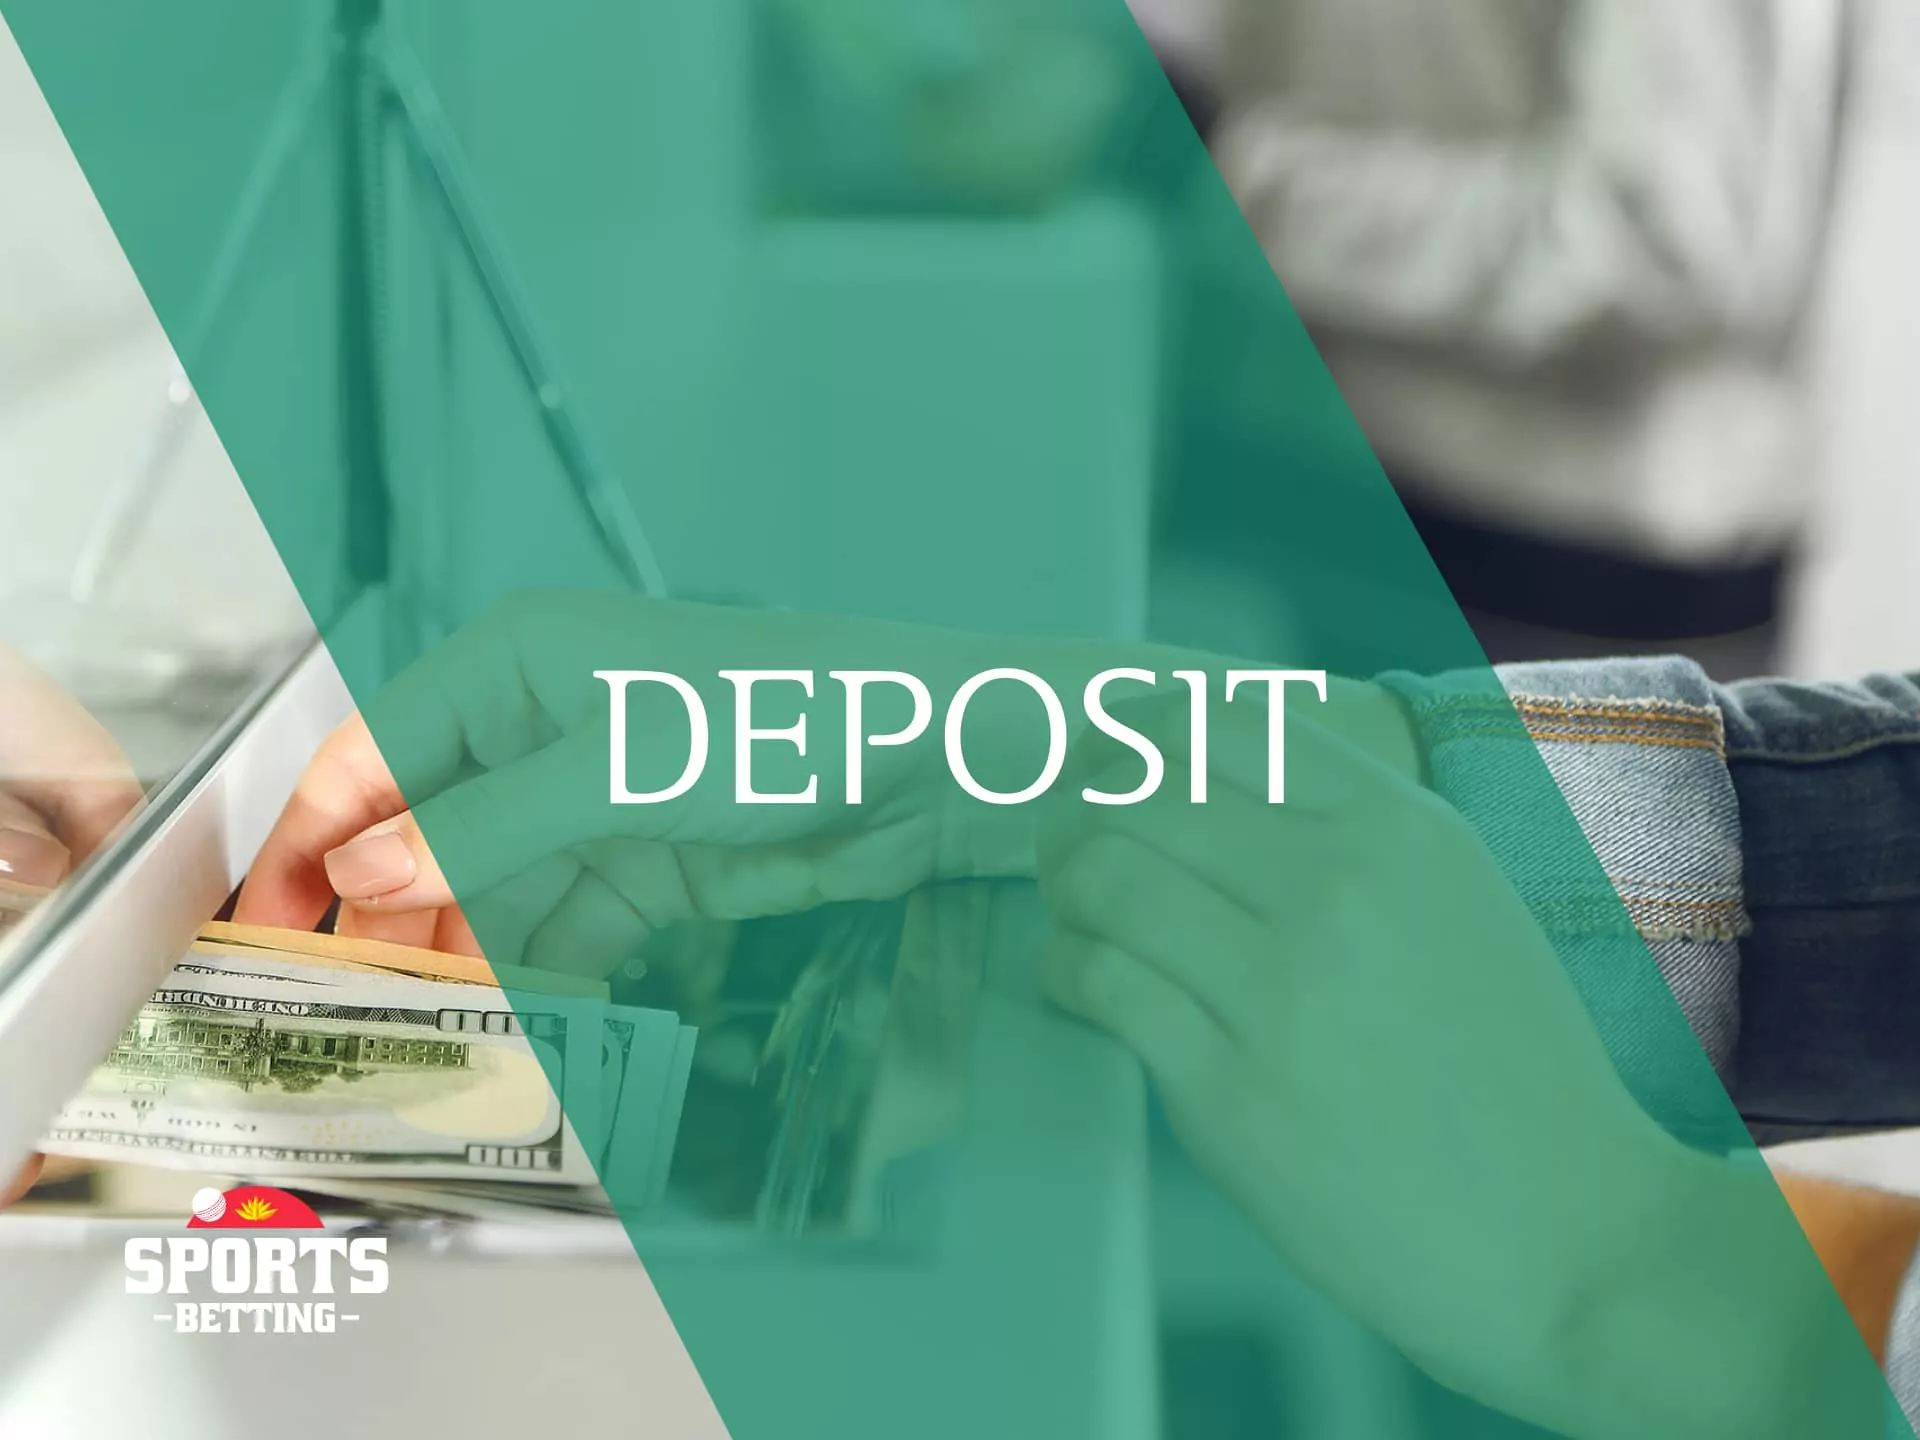 How to deposit money at horse racing betting sites.